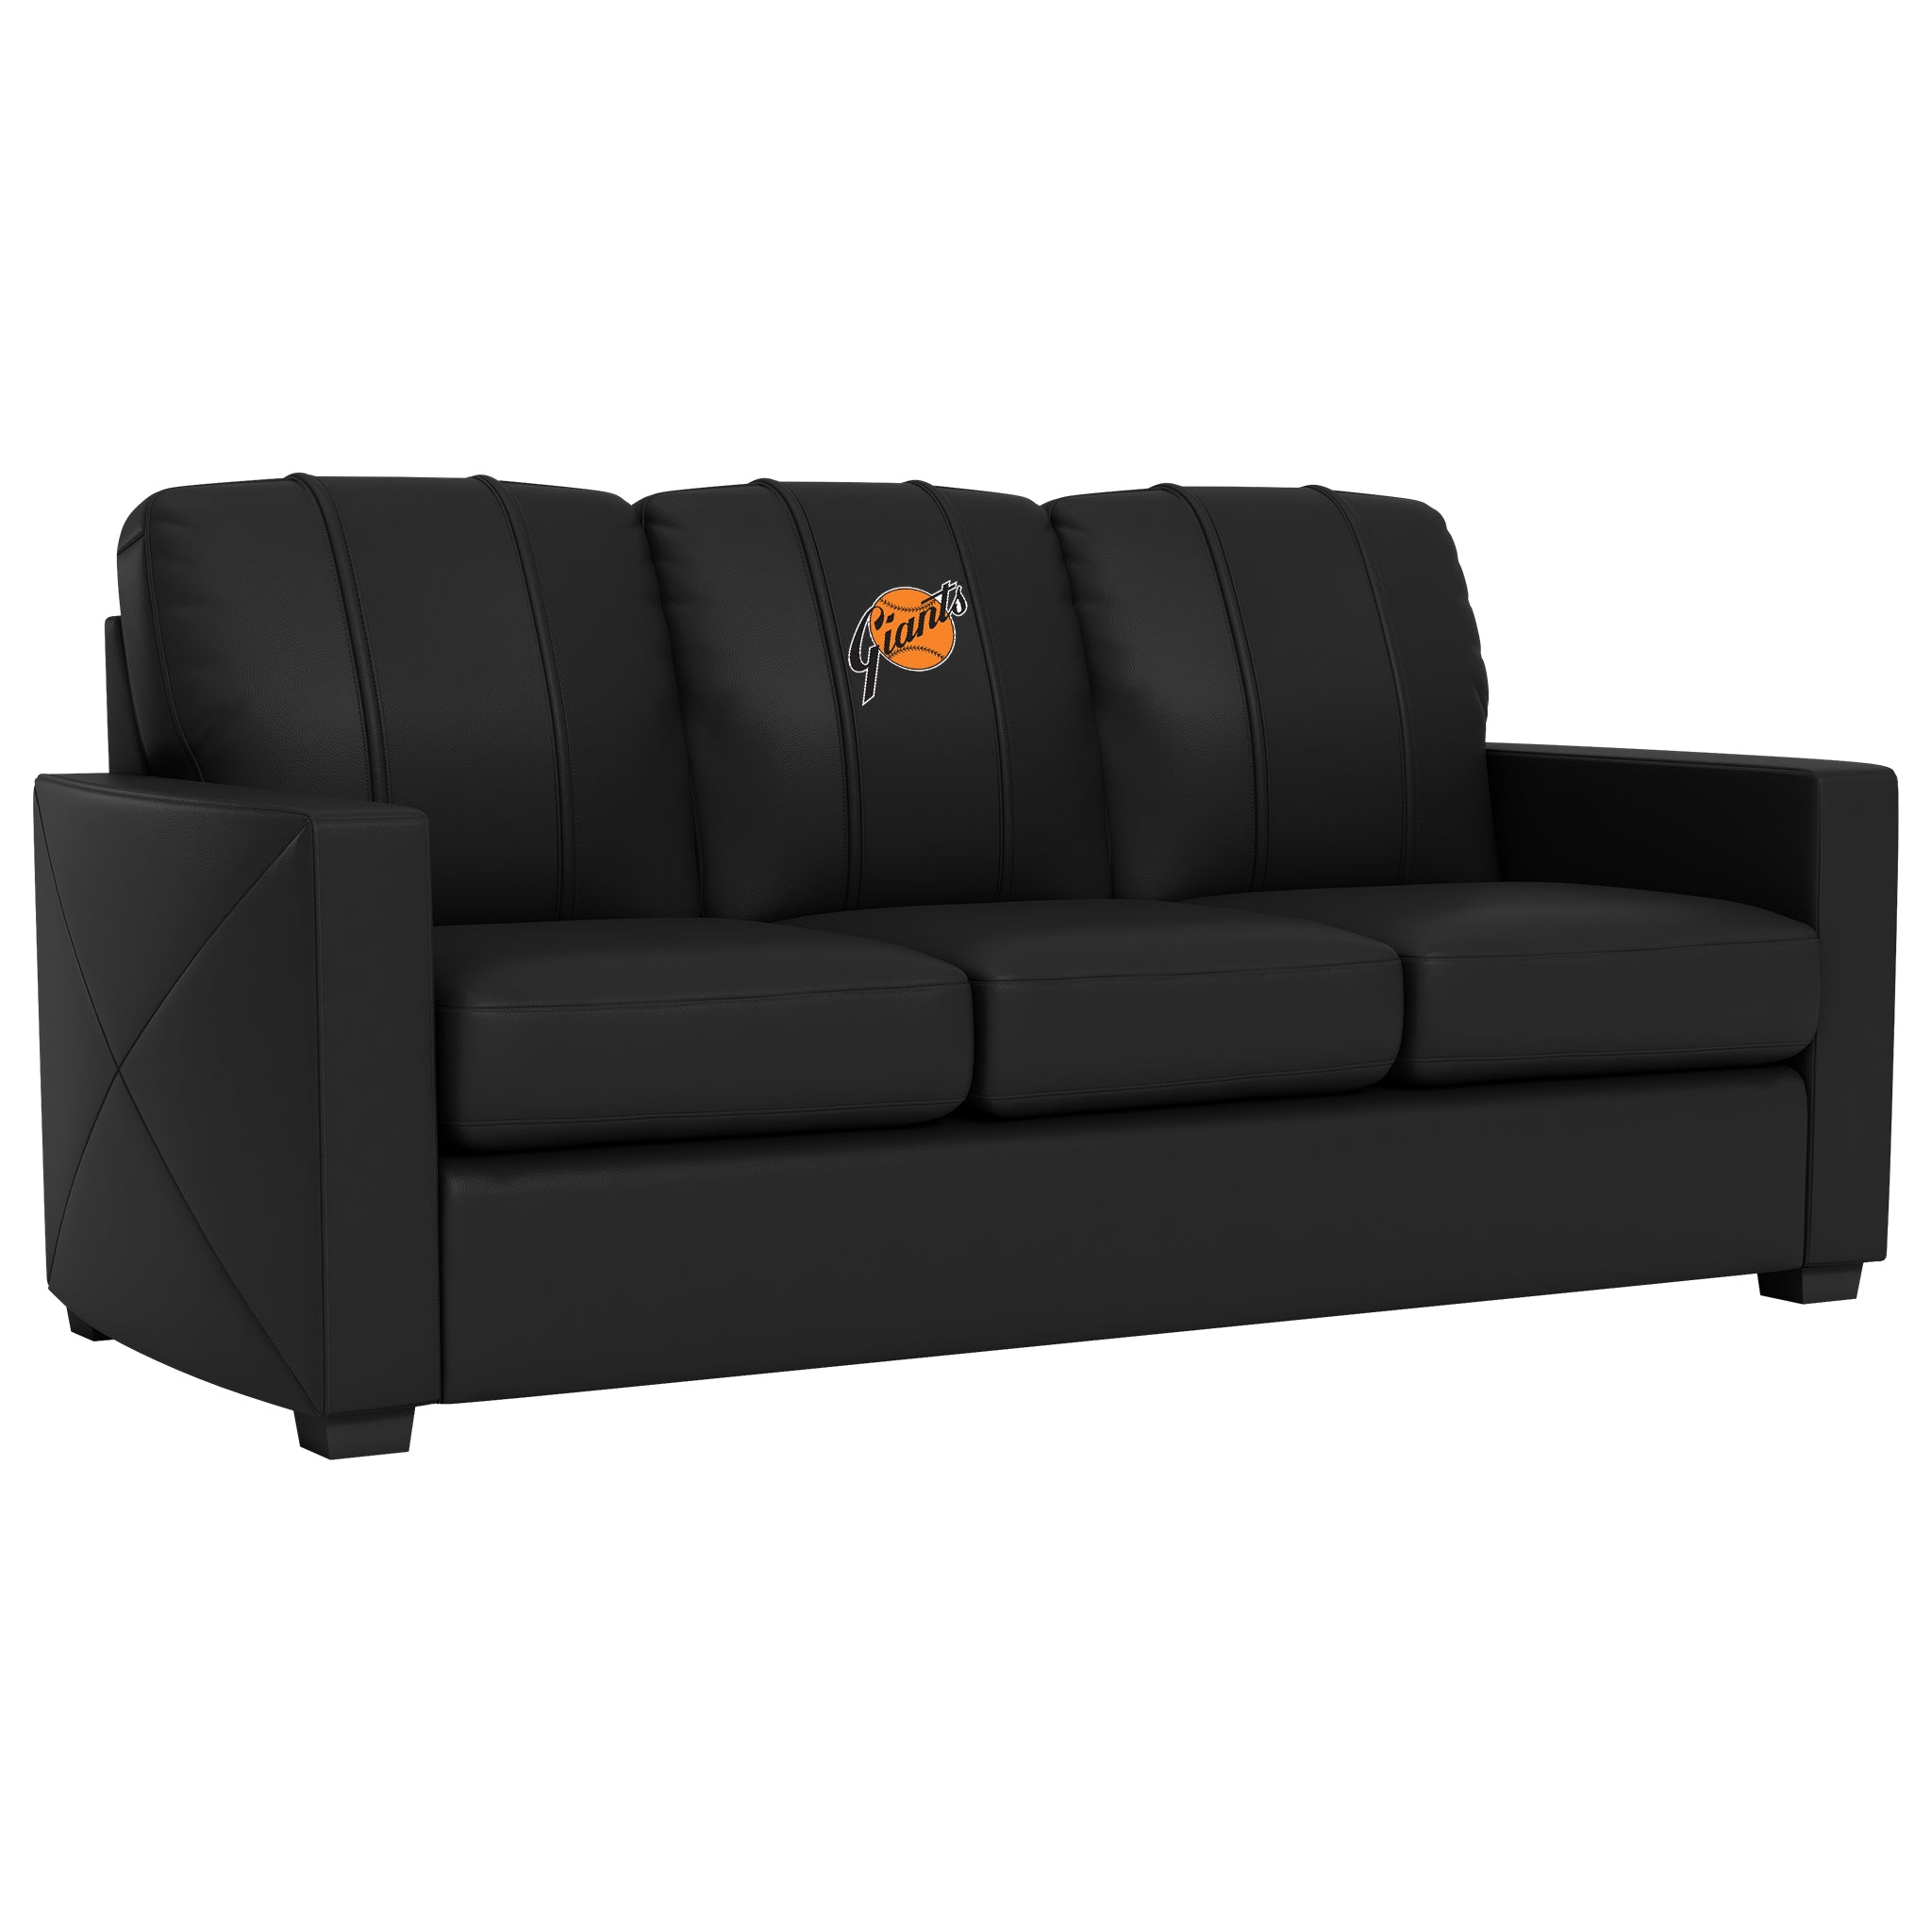 Silver Sofa with San Francisco Giants Cooperstown